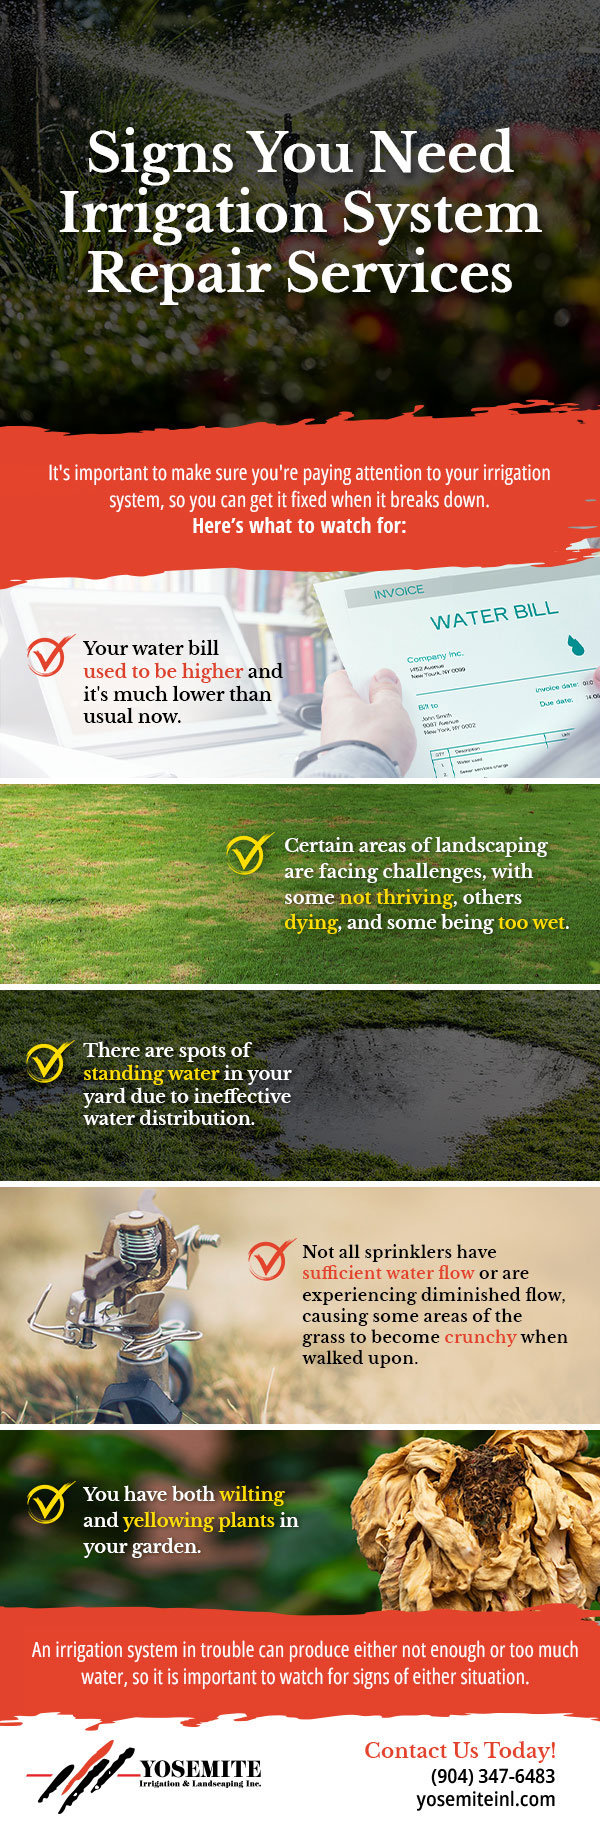 Signs You Need Irrigation System Repair Services